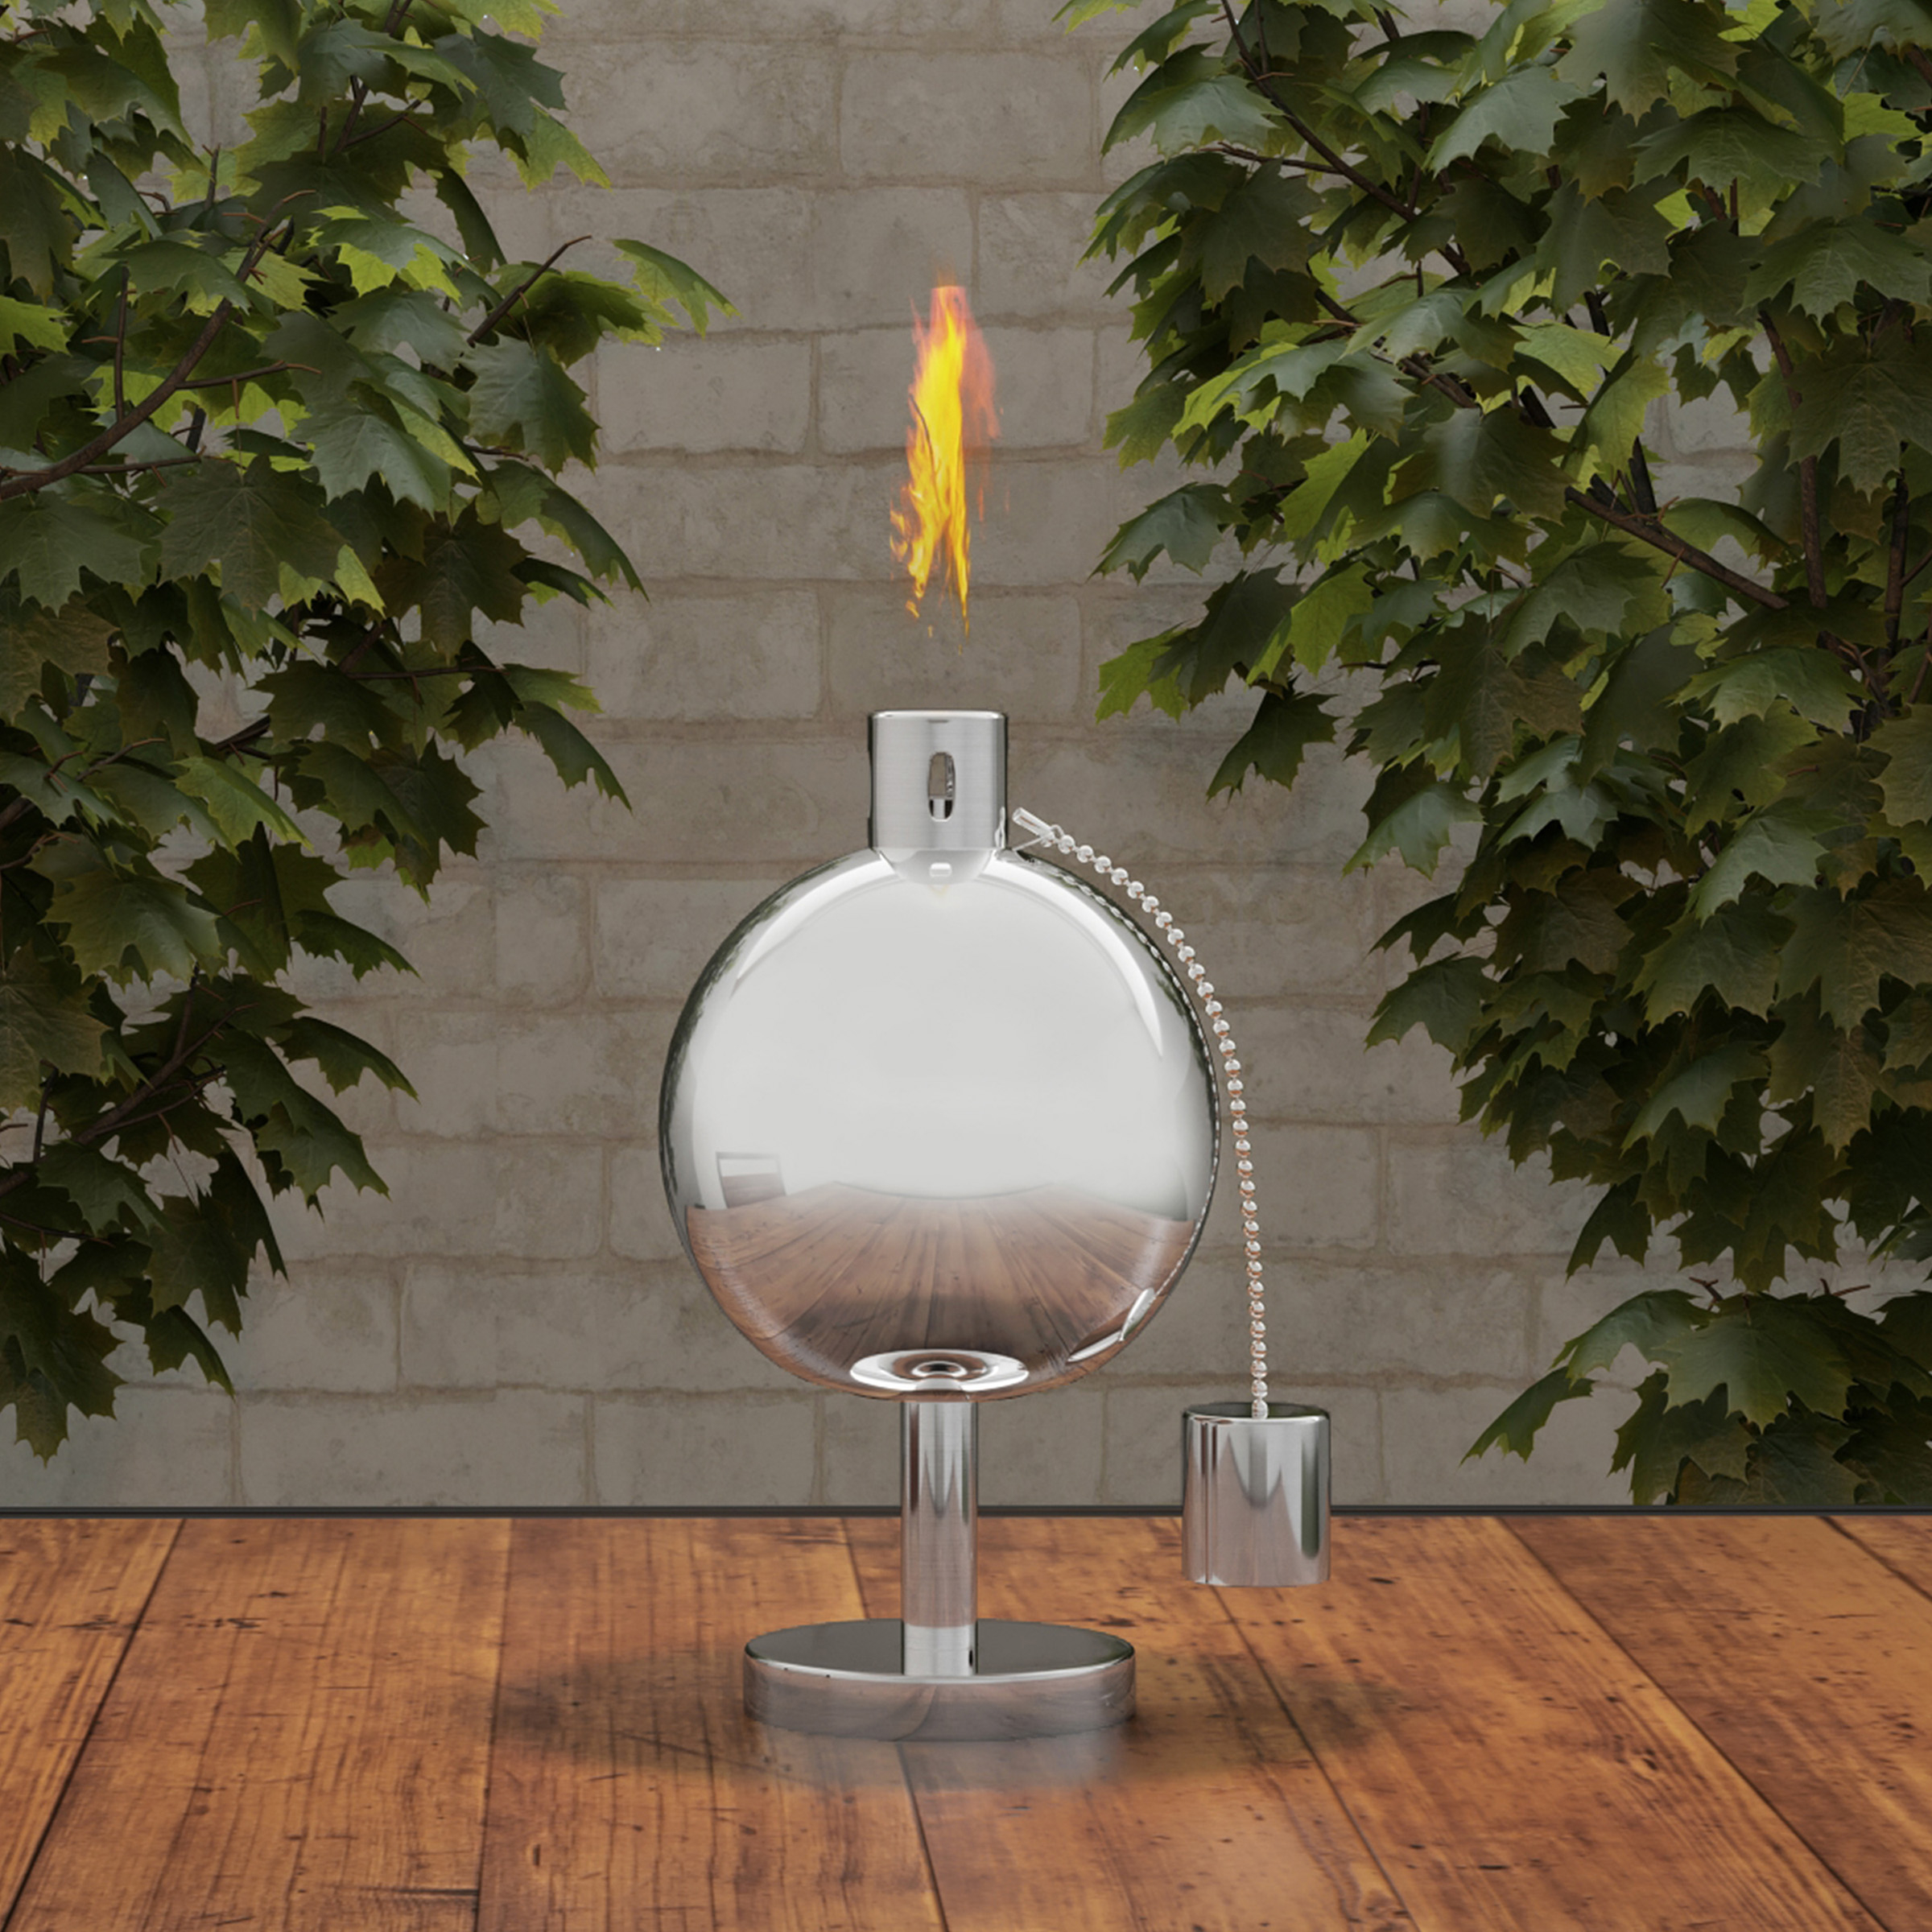 10 Inch Round Tabletop Torch Lamp Stainless Steel Outdoor Fuel Canister Flame Light For Citronella With Fiberglass Wick